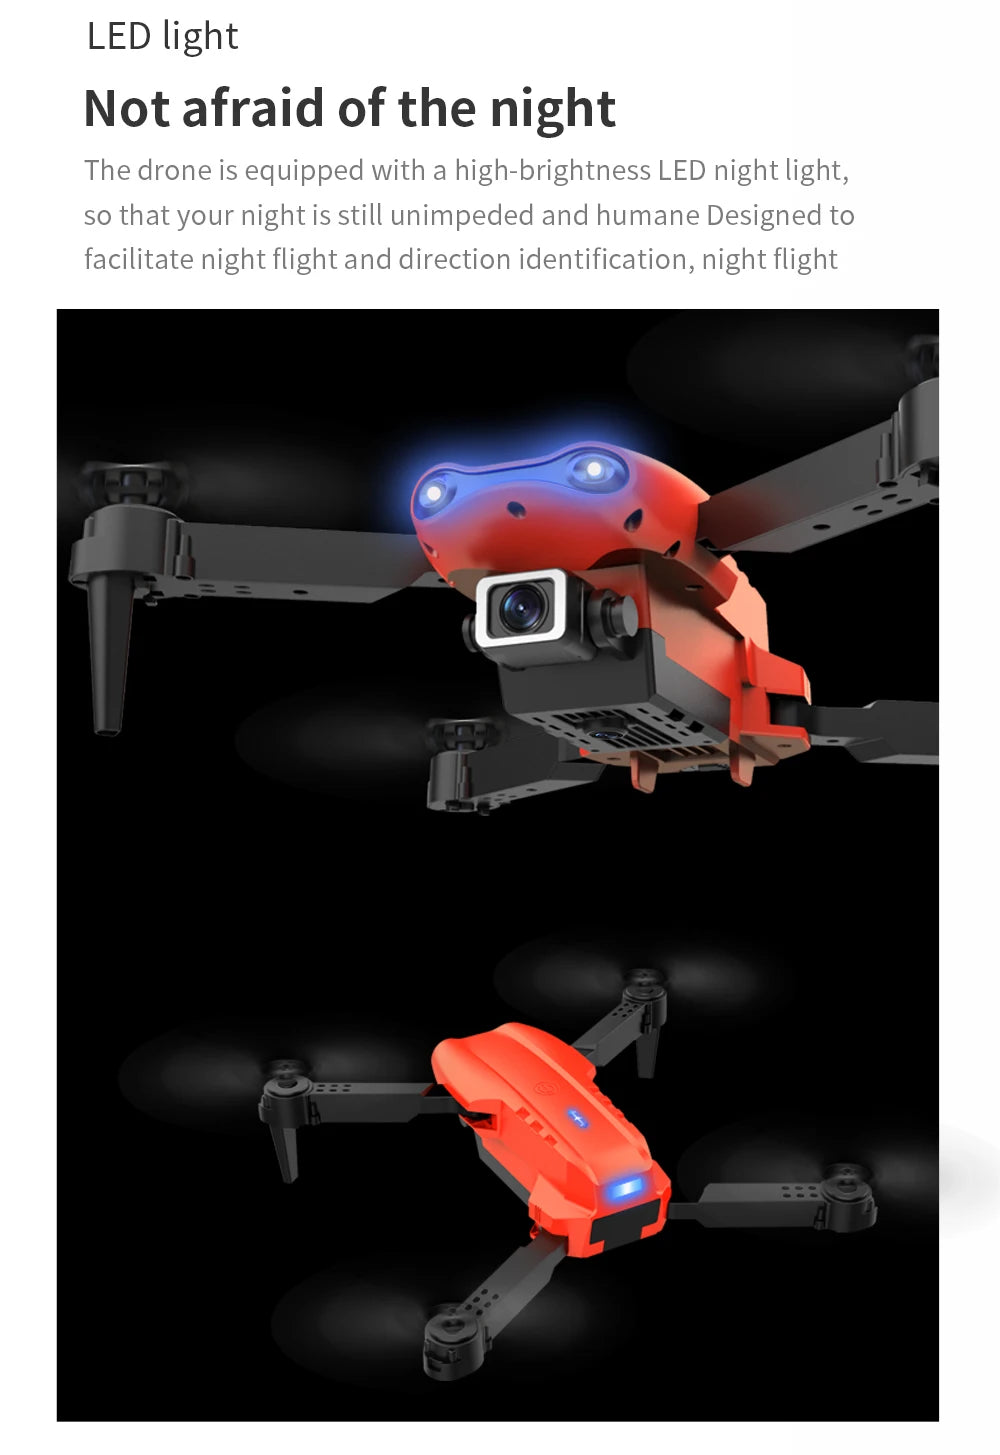 XYRC K3 Mini Drone, drone is equipped with a high-brightness led night light